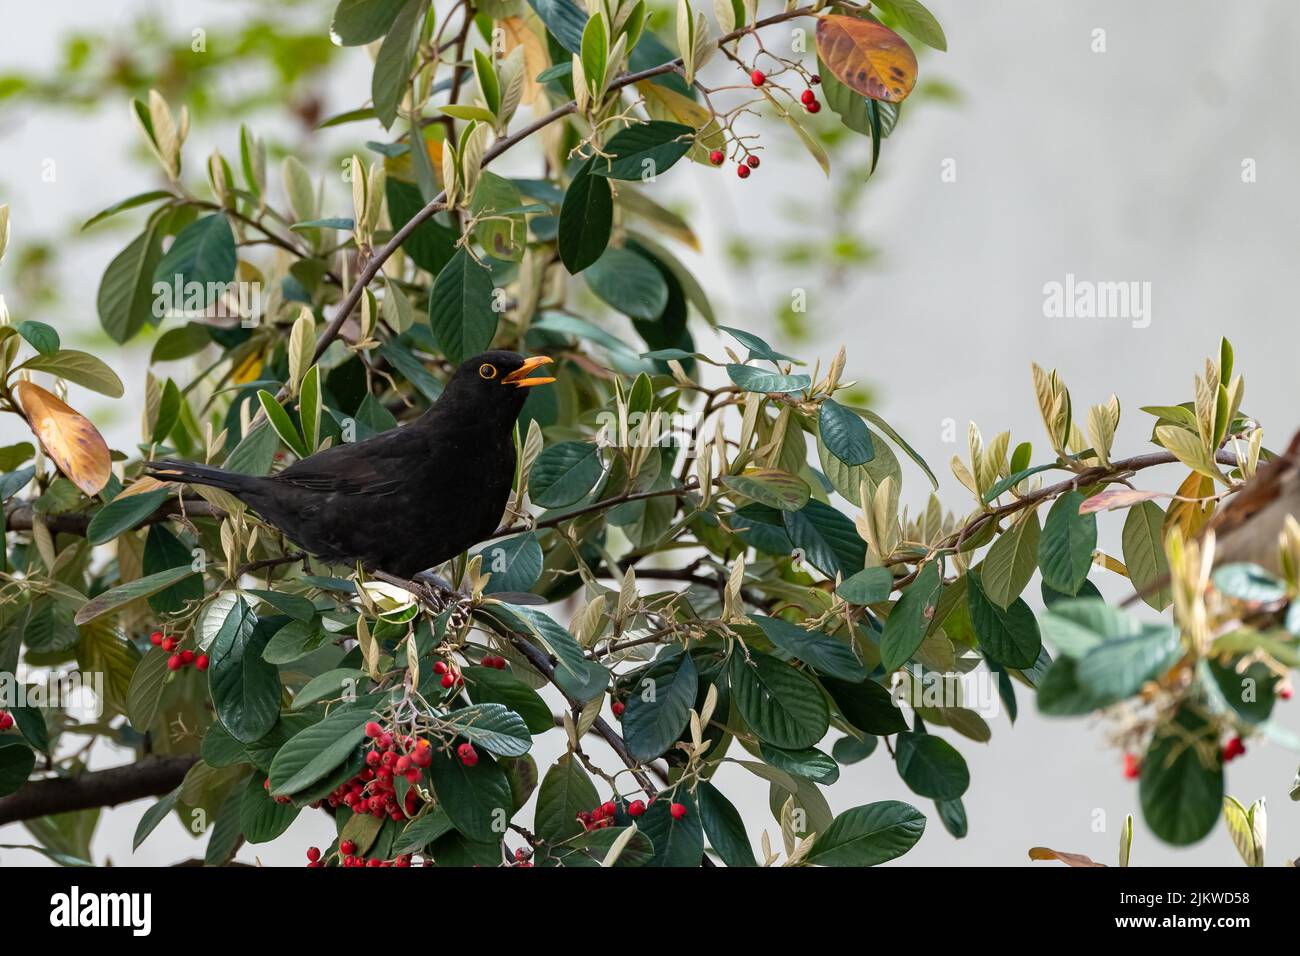 Common blackbird, Turdus merula, eating red seeds in a tree Stock Photo